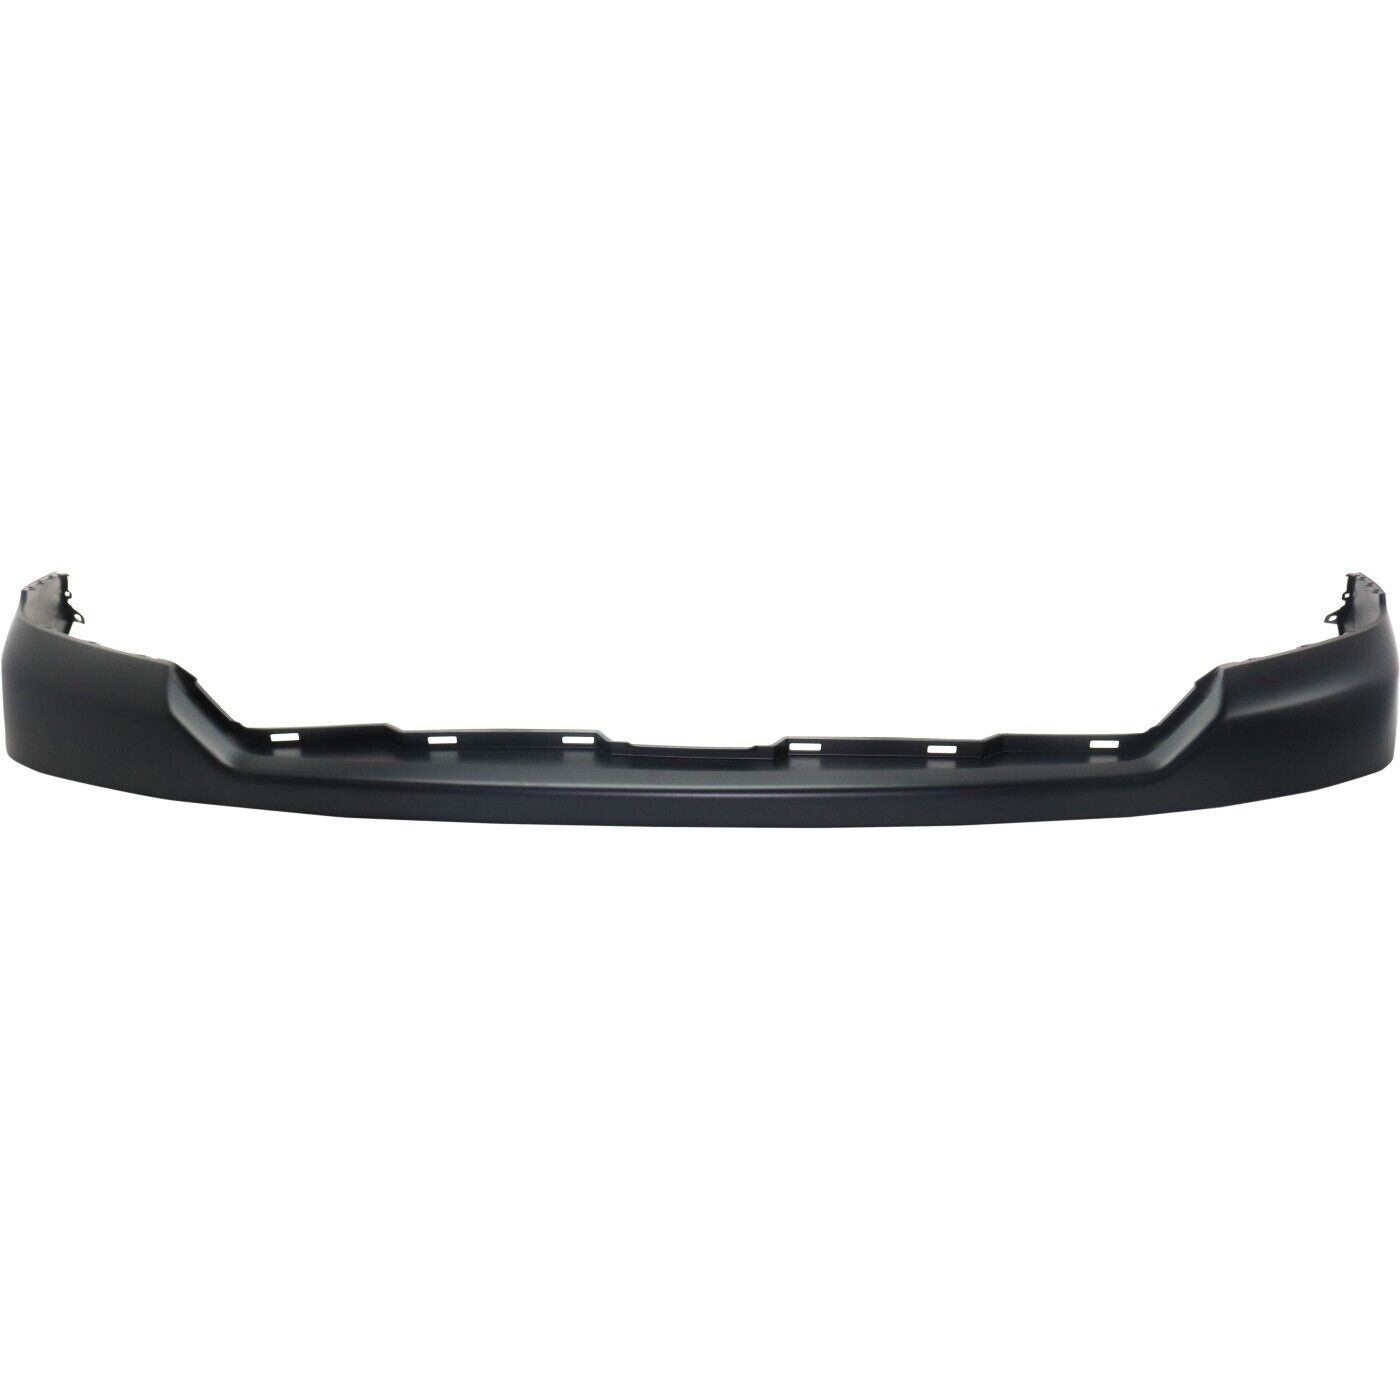 New Bumper Cover Fascia Front Upper for Nissan NV2500 12-18 NI1014101 620251PA0A